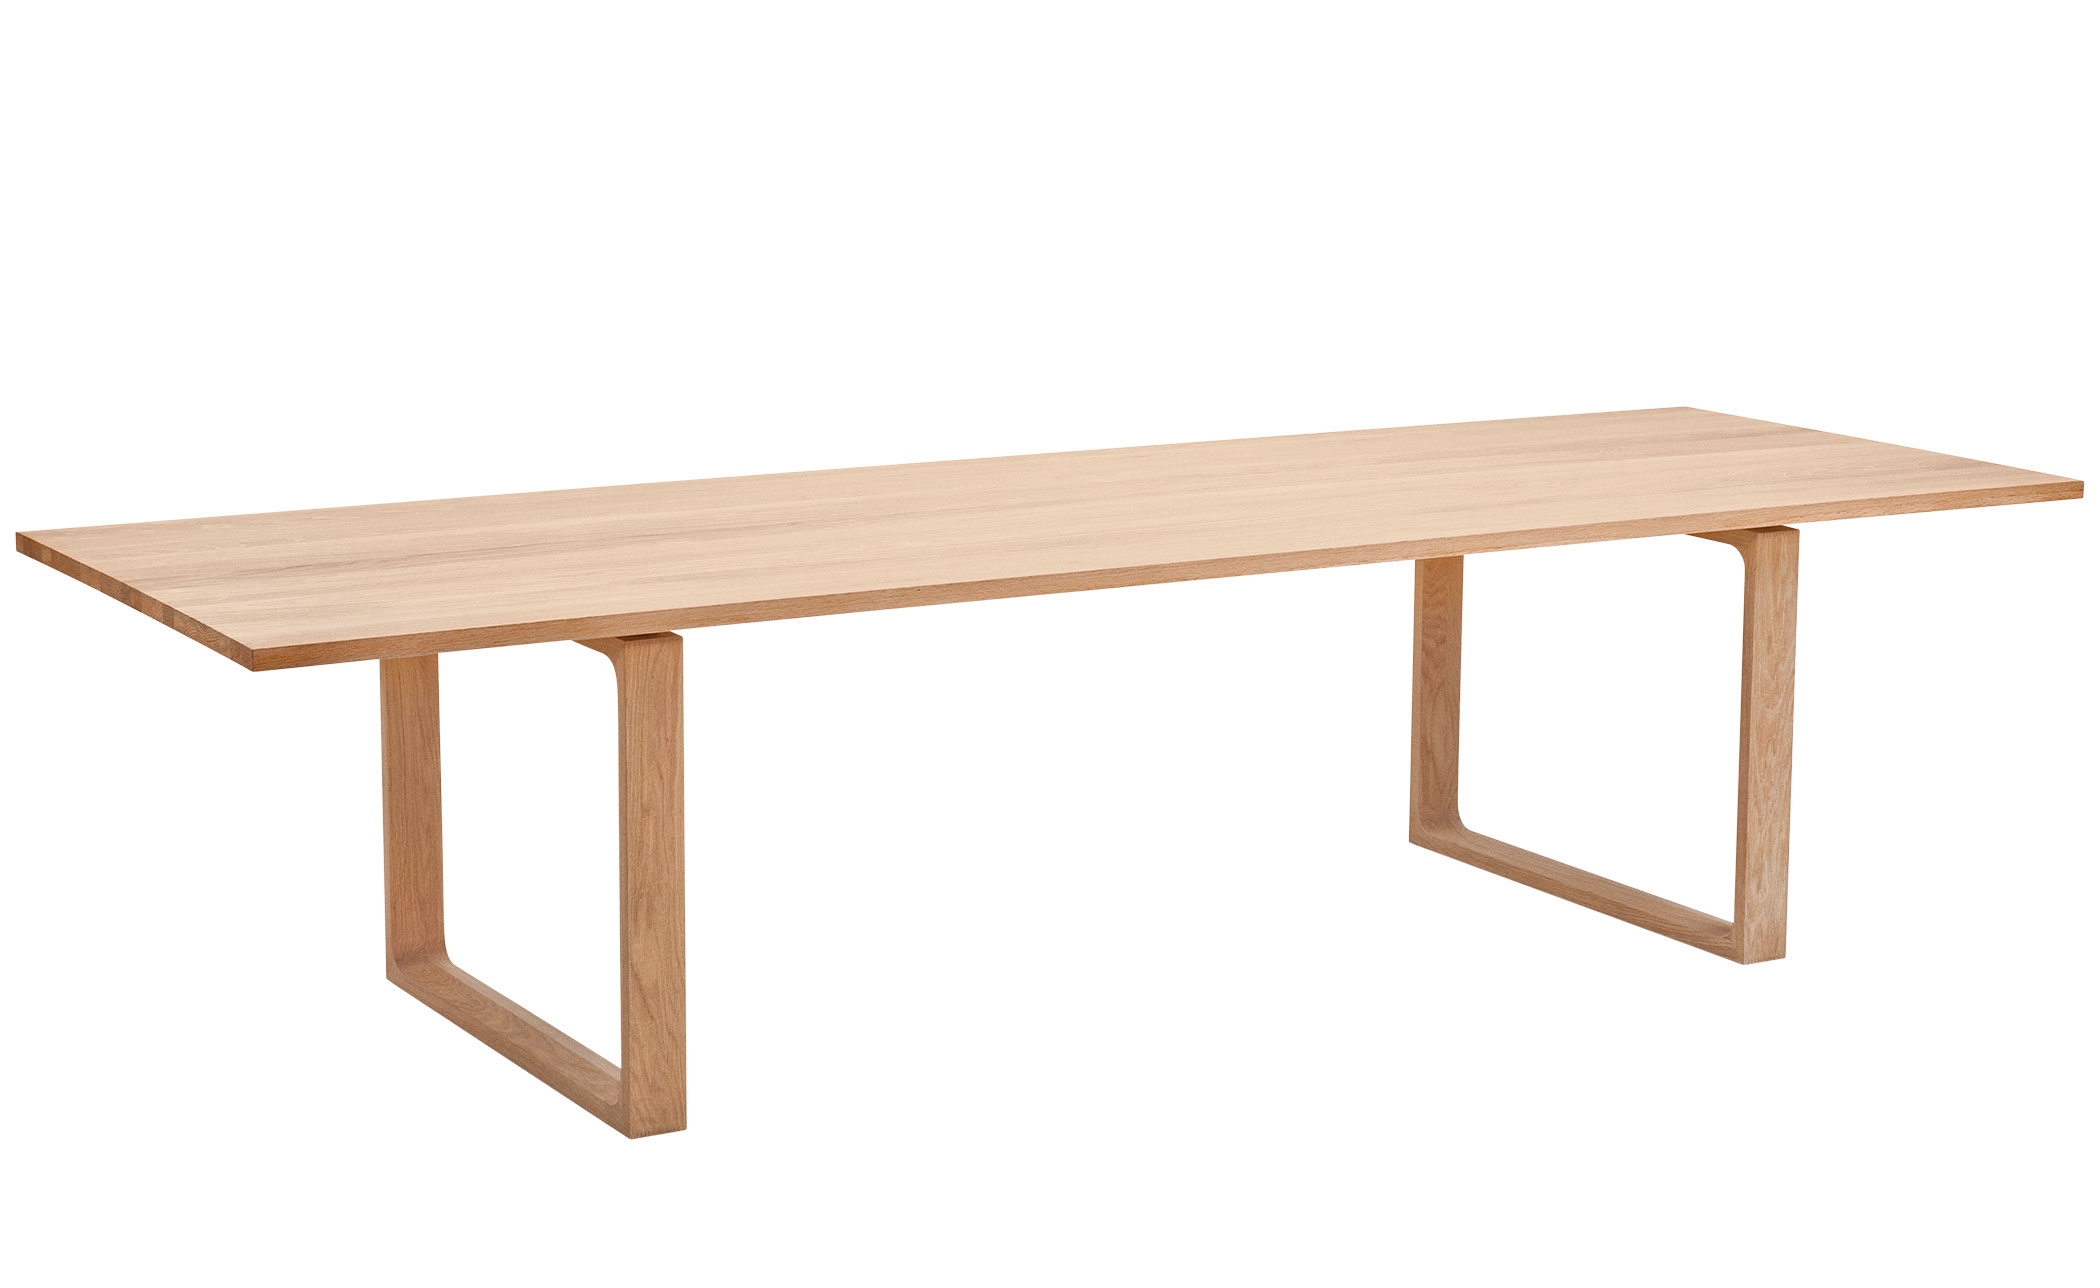 Knop Hensigt sweater Essay Table by Cecilie Manz for Fritza Hansen | hive